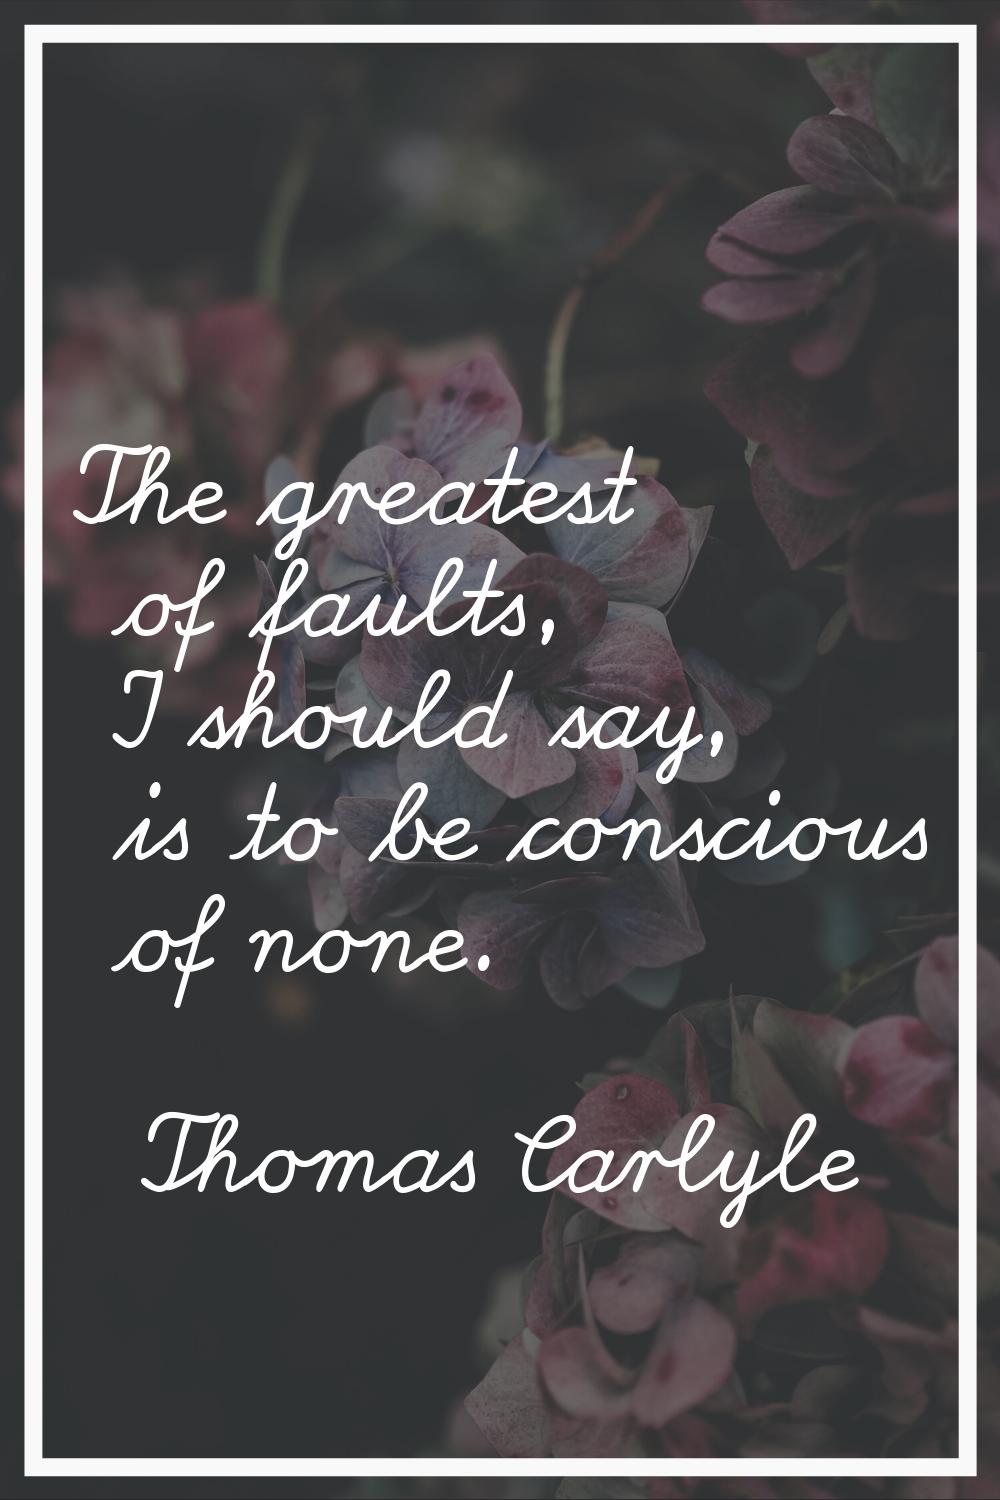 The greatest of faults, I should say, is to be conscious of none.